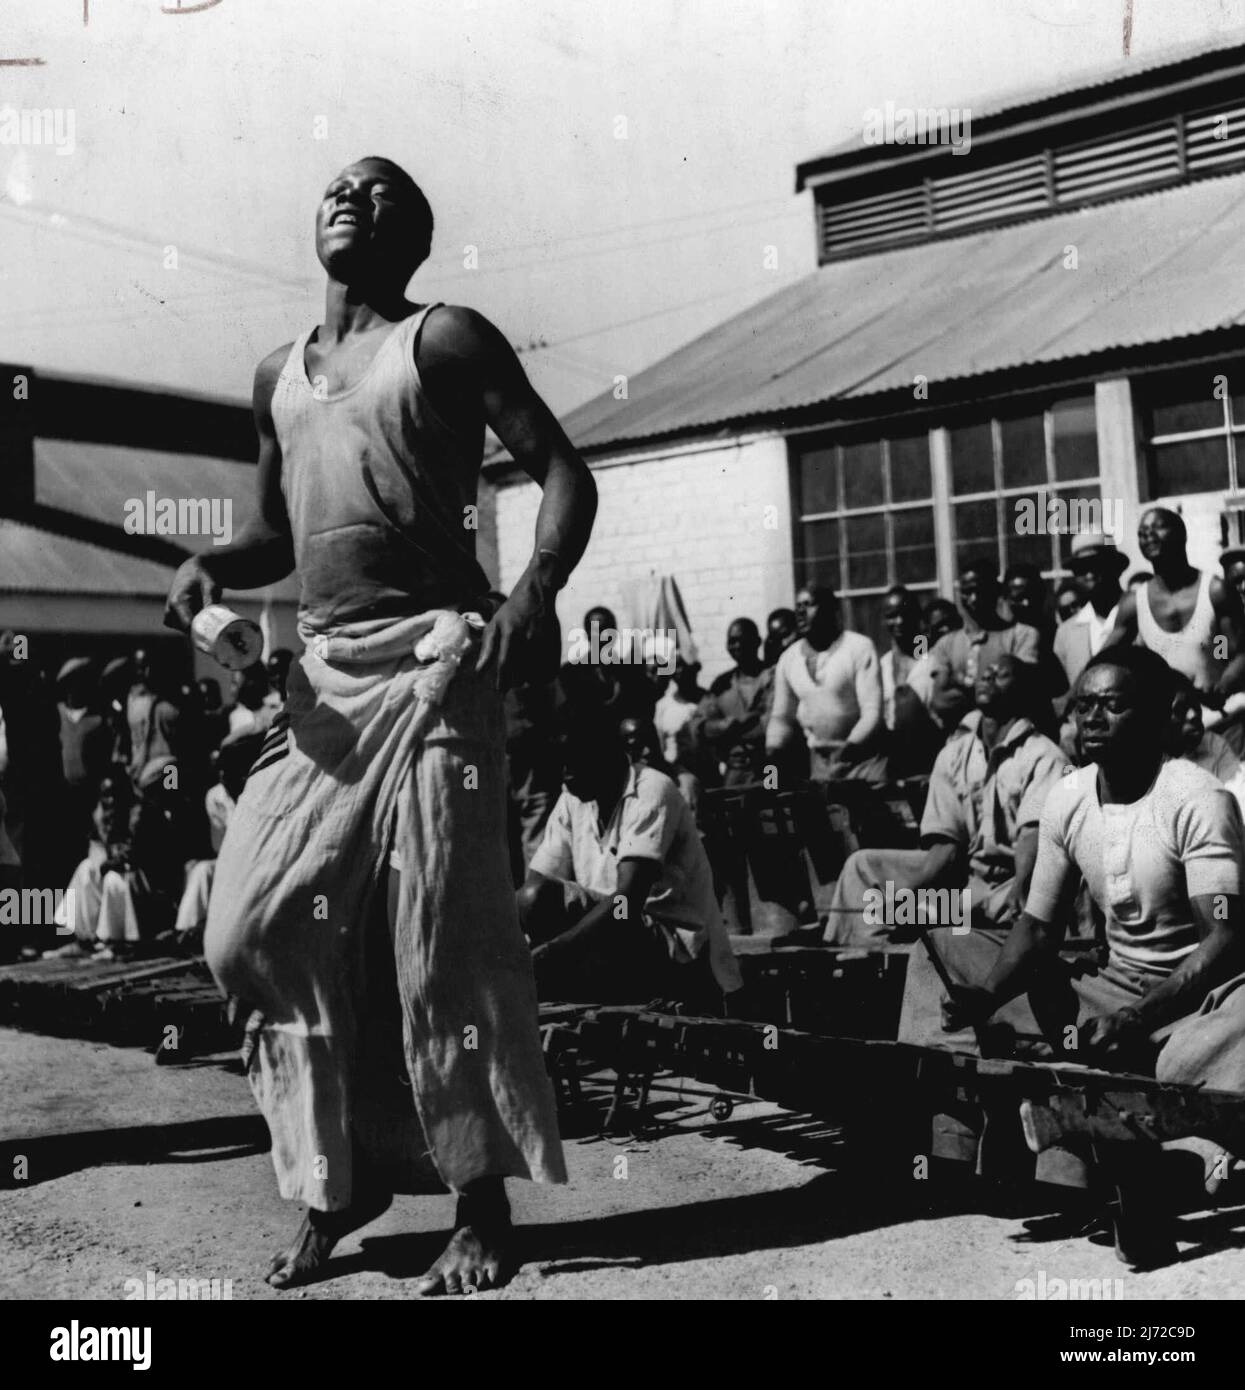 'Look Out For Natives' - Skin - Deep Civilization In Johannesburg, South Africa - Young Zulu gold miners staging dance in their compound. Tomtons beat as they chant the opening strains. March 14, 1938. (Photo by Pix Publishing Inc.). Stock Photo